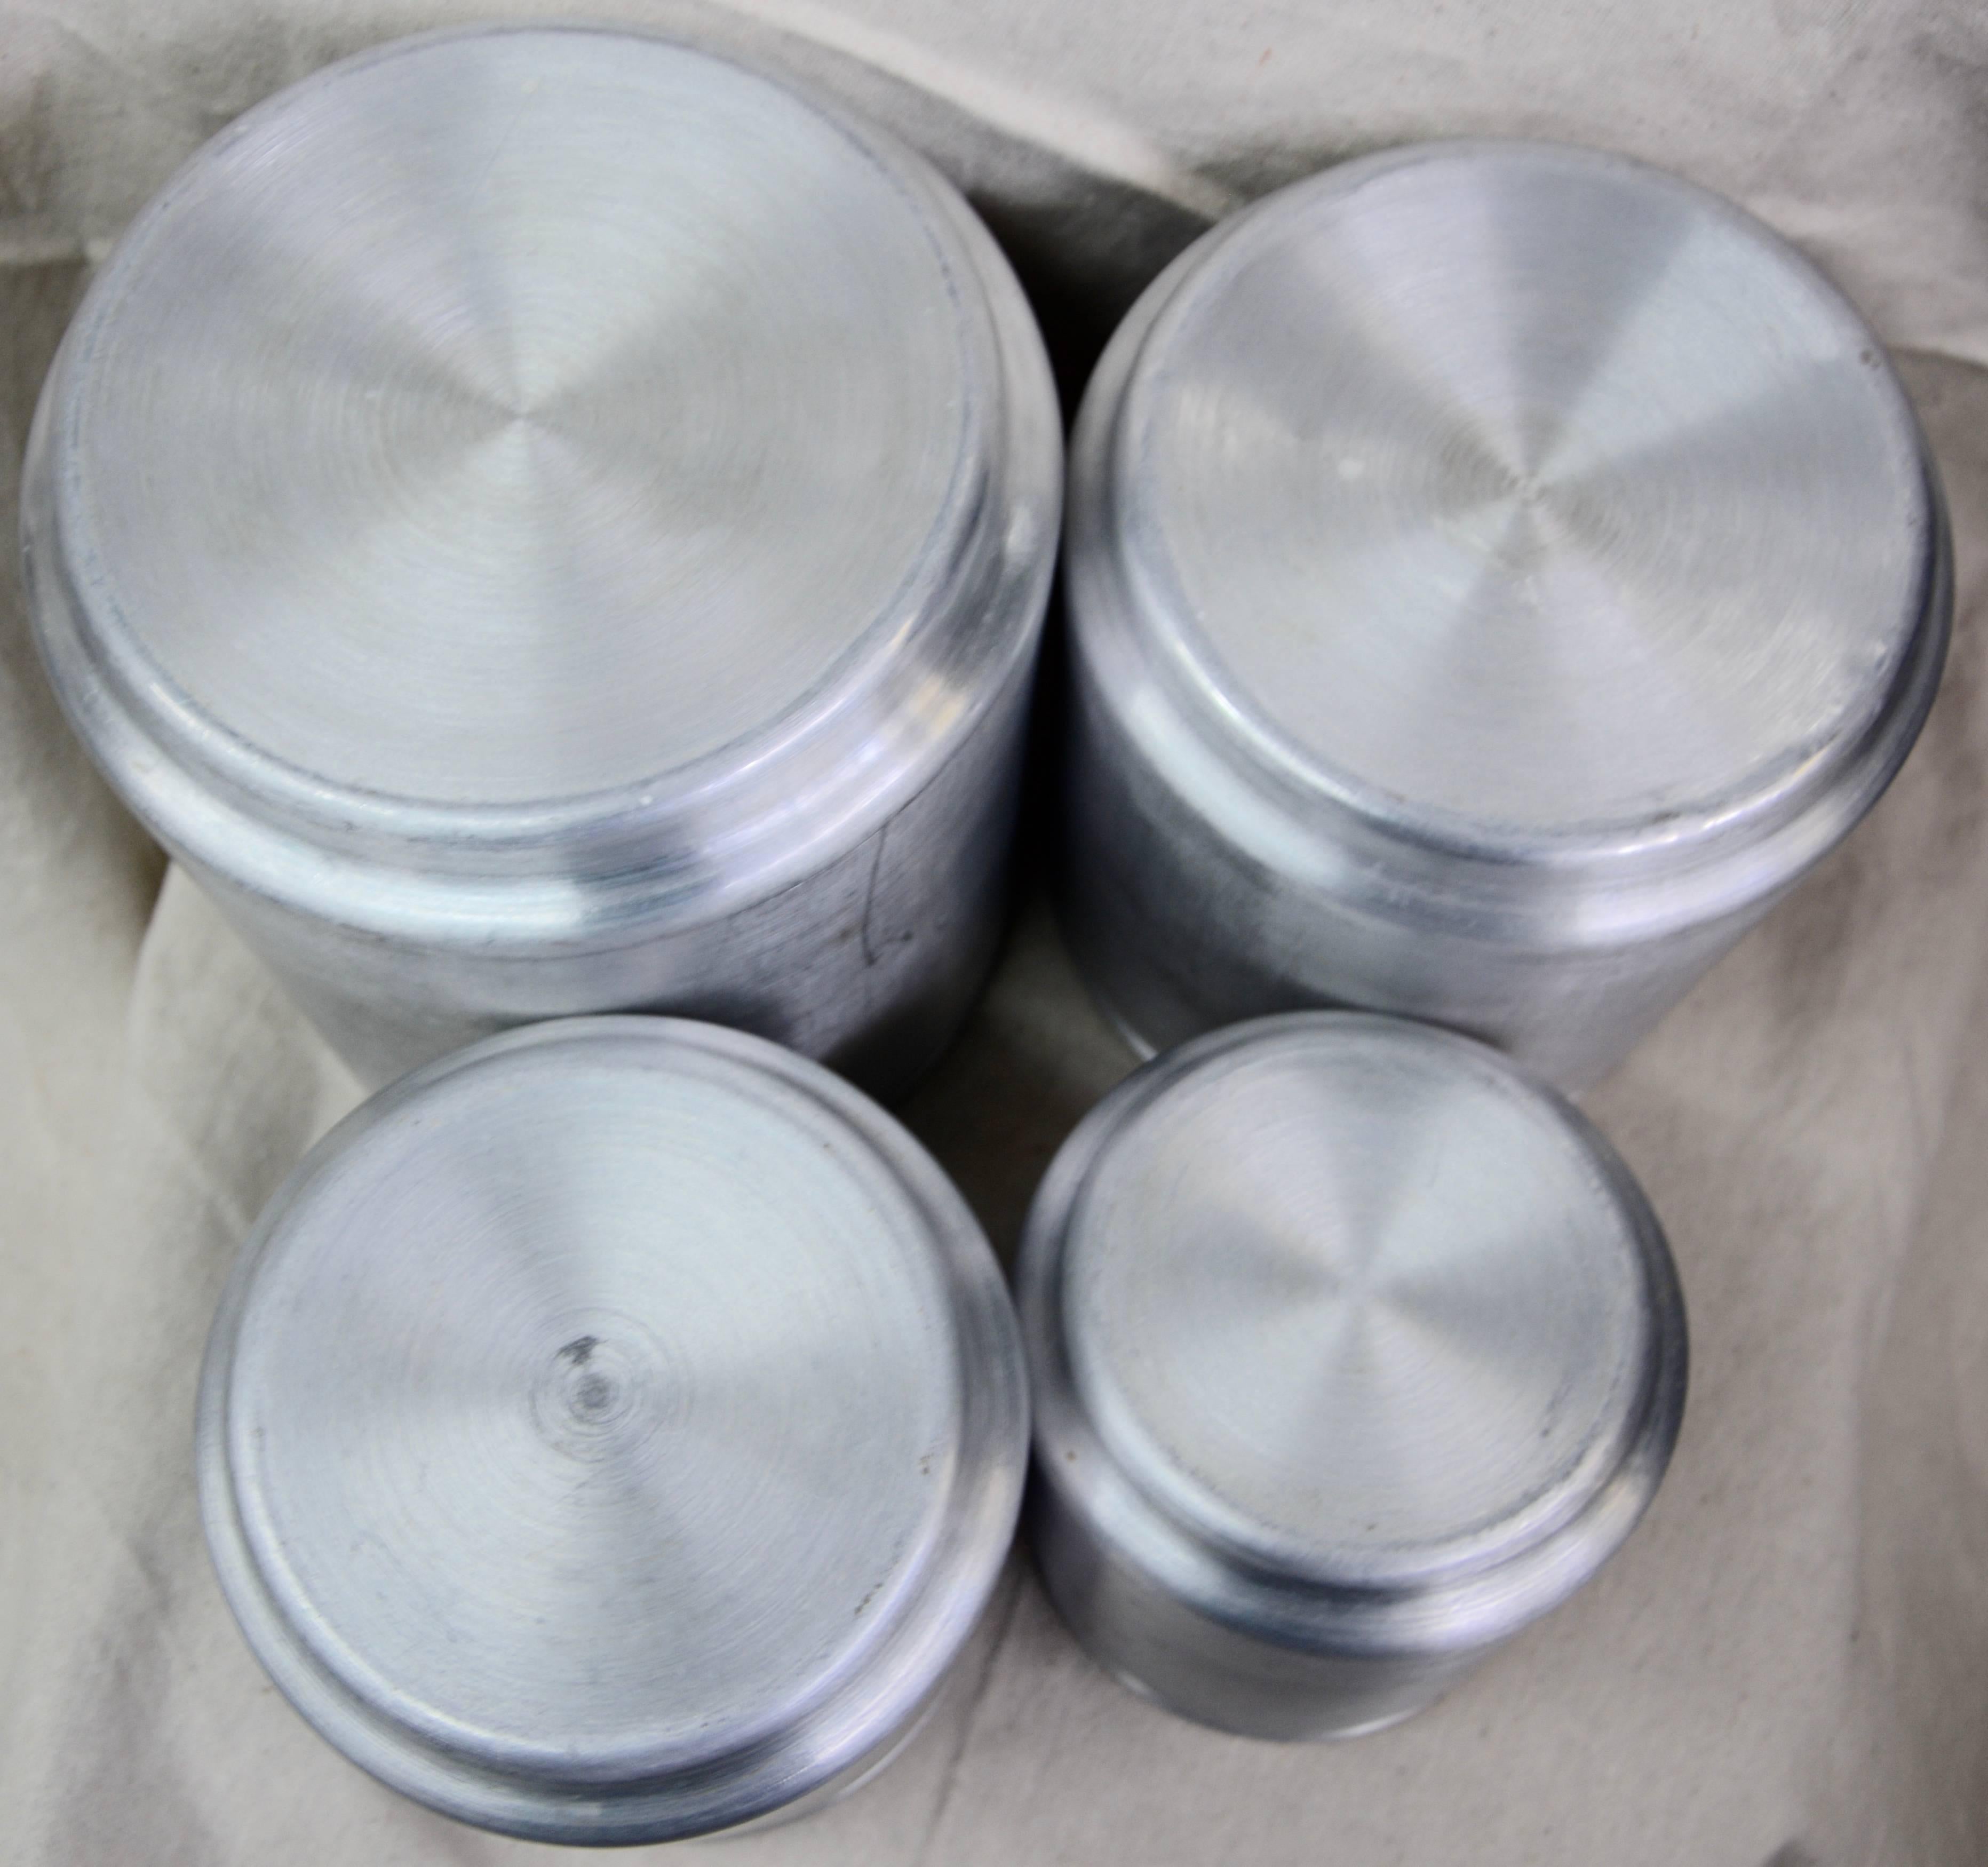 Aluminum Four-Piece Canister Set by Kromex In Fair Condition For Sale In Cookeville, TN